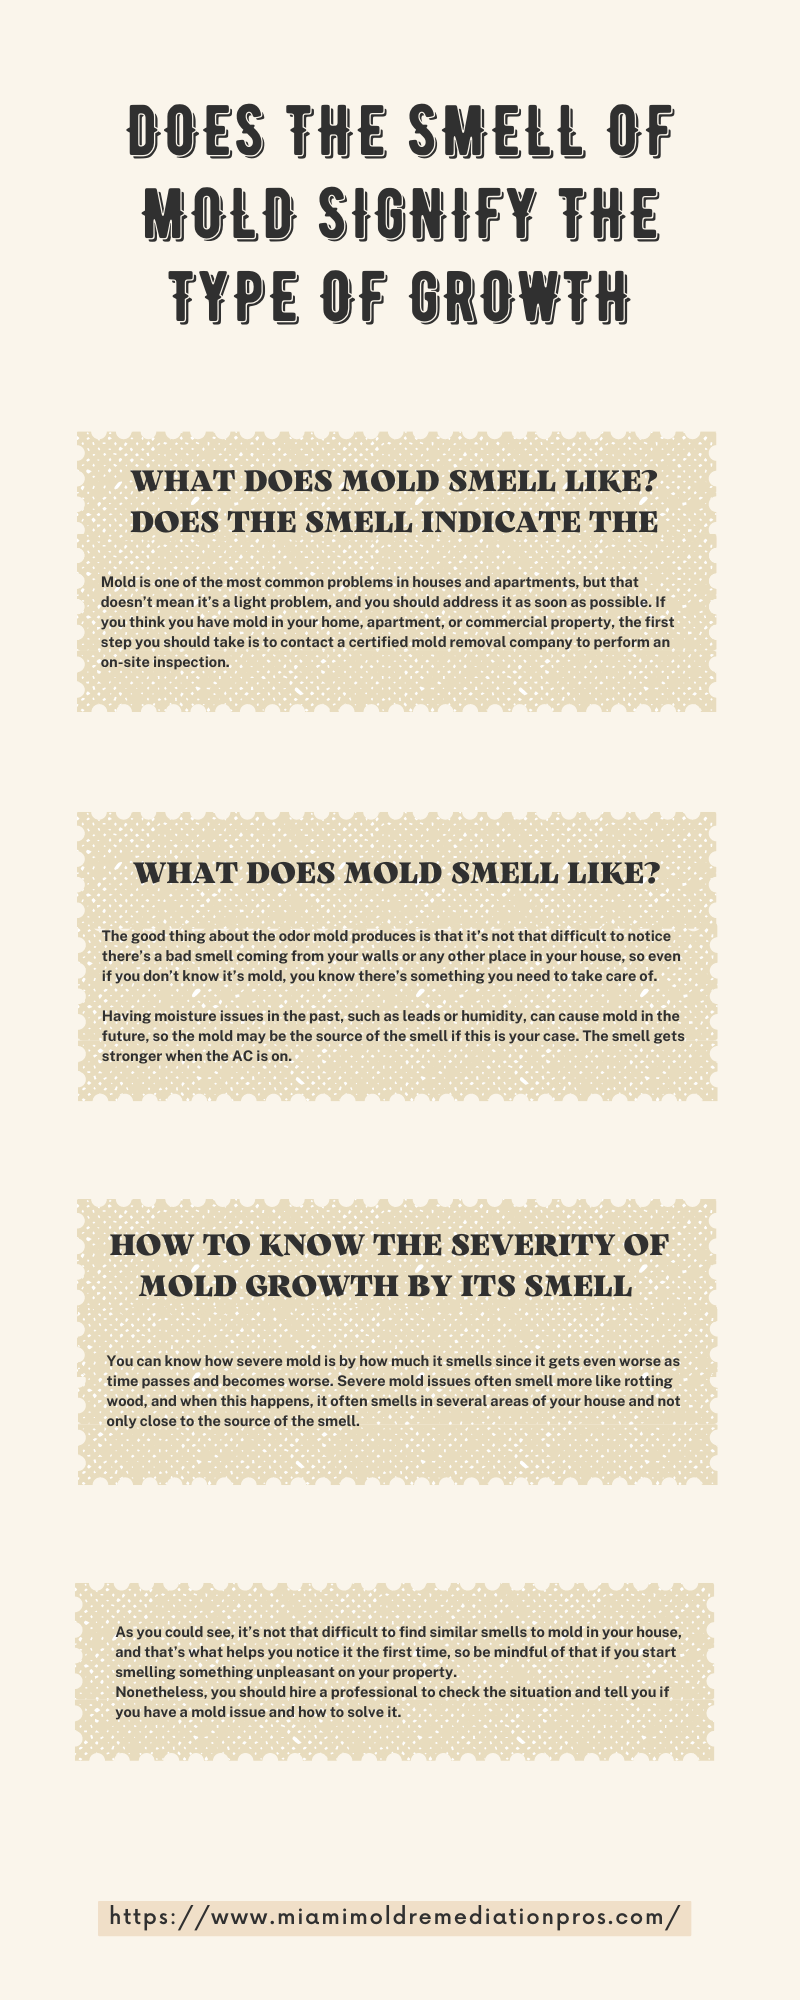 Does The Smell of Mold Signify The Type of Growth